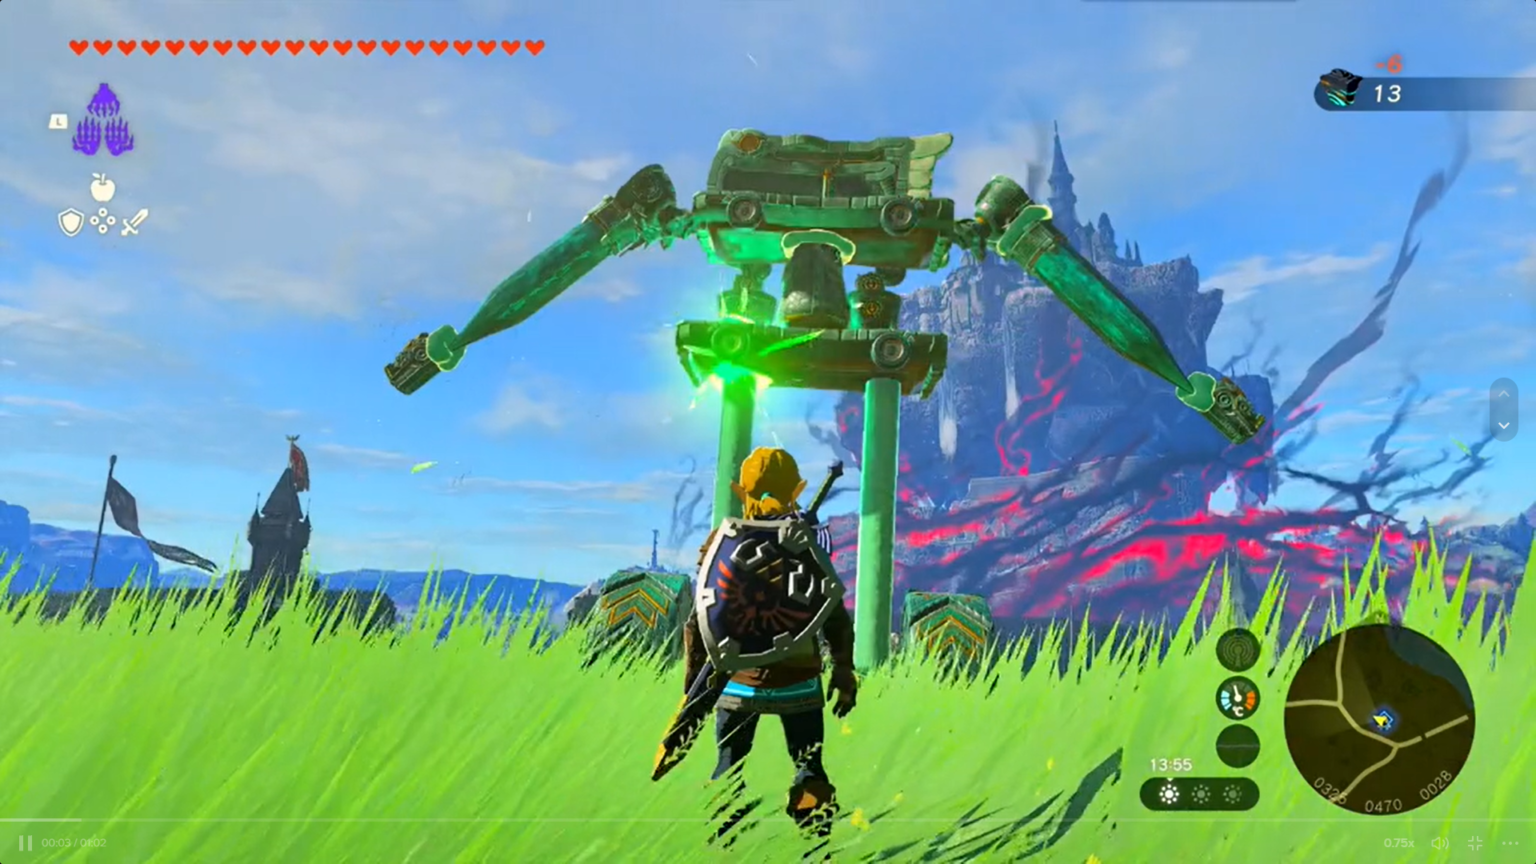 Zelda players go wild with Ultrahand creations in Tears Of The Kingdom